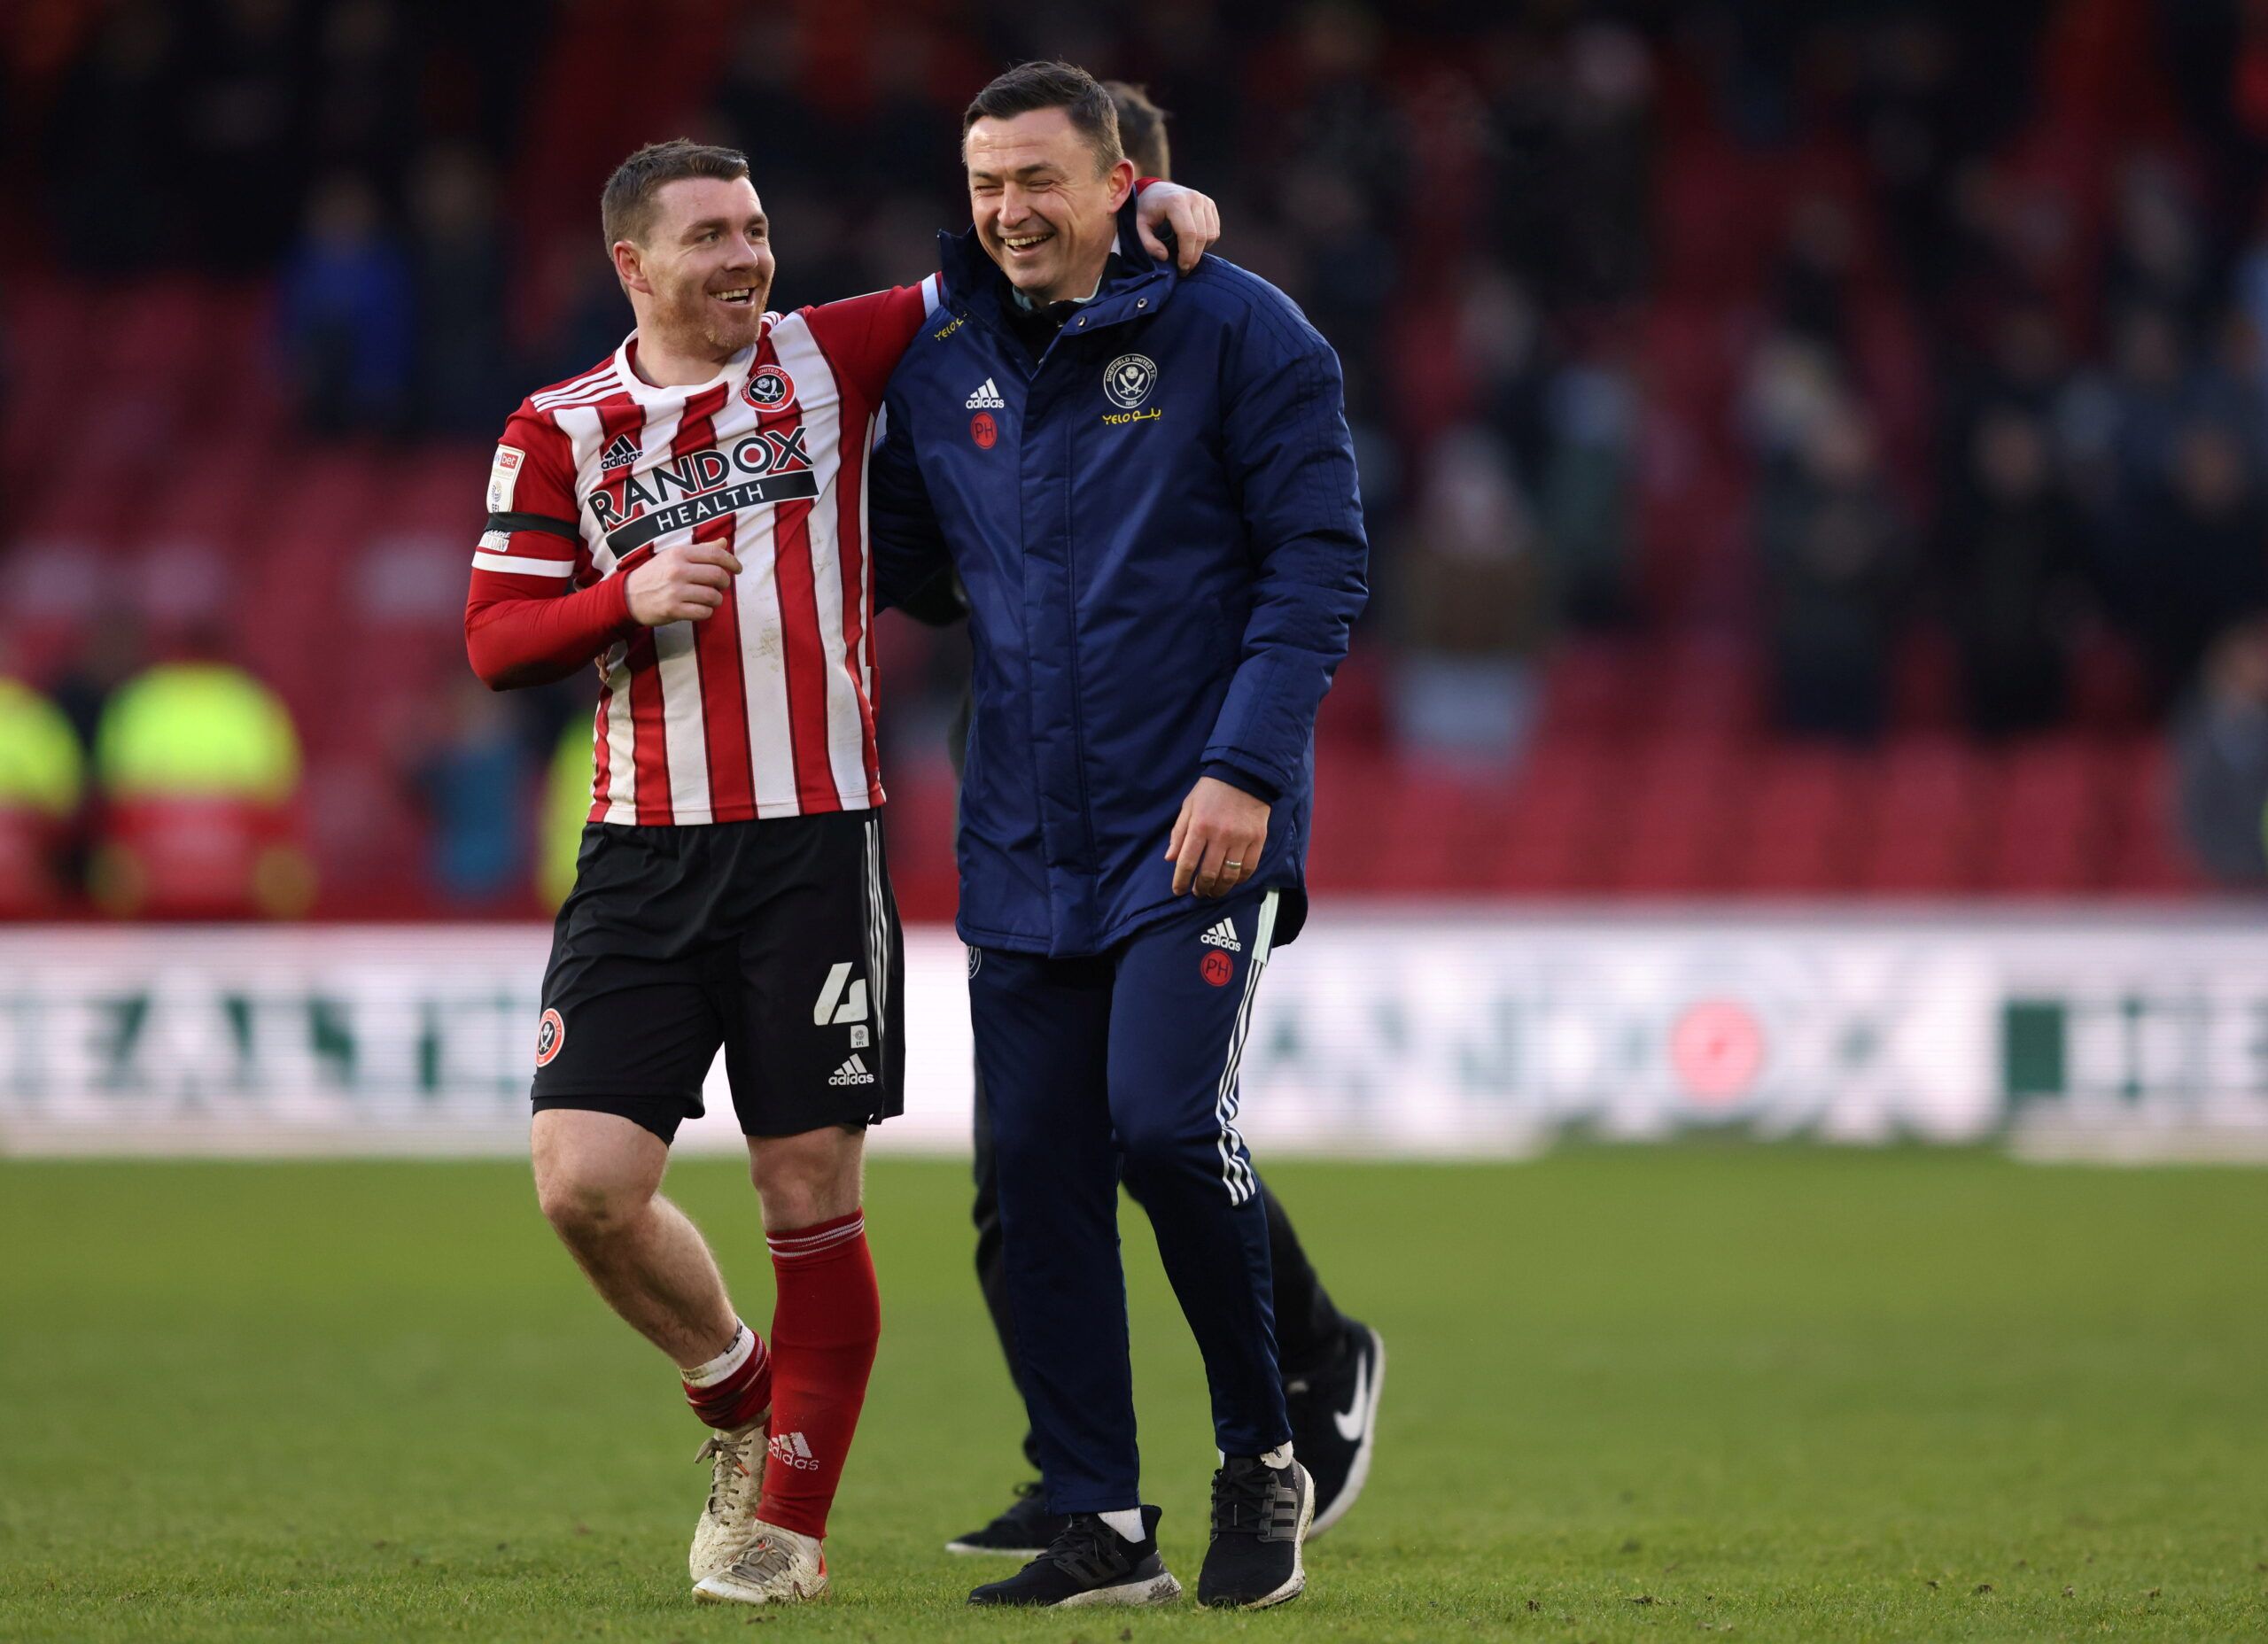 Soccer Football - Championship - Sheffield United v Swansea City - Bramall Lane, Sheffield, Britain - February 19, 2022 Sheffield United manager Paul Heckingbottom and John Fleck celebrate after the match  Action Images/John Clifton??EDITORIAL USE ONLY. No use with unauthorized audio, video, data, fixture lists, club/league logos or 